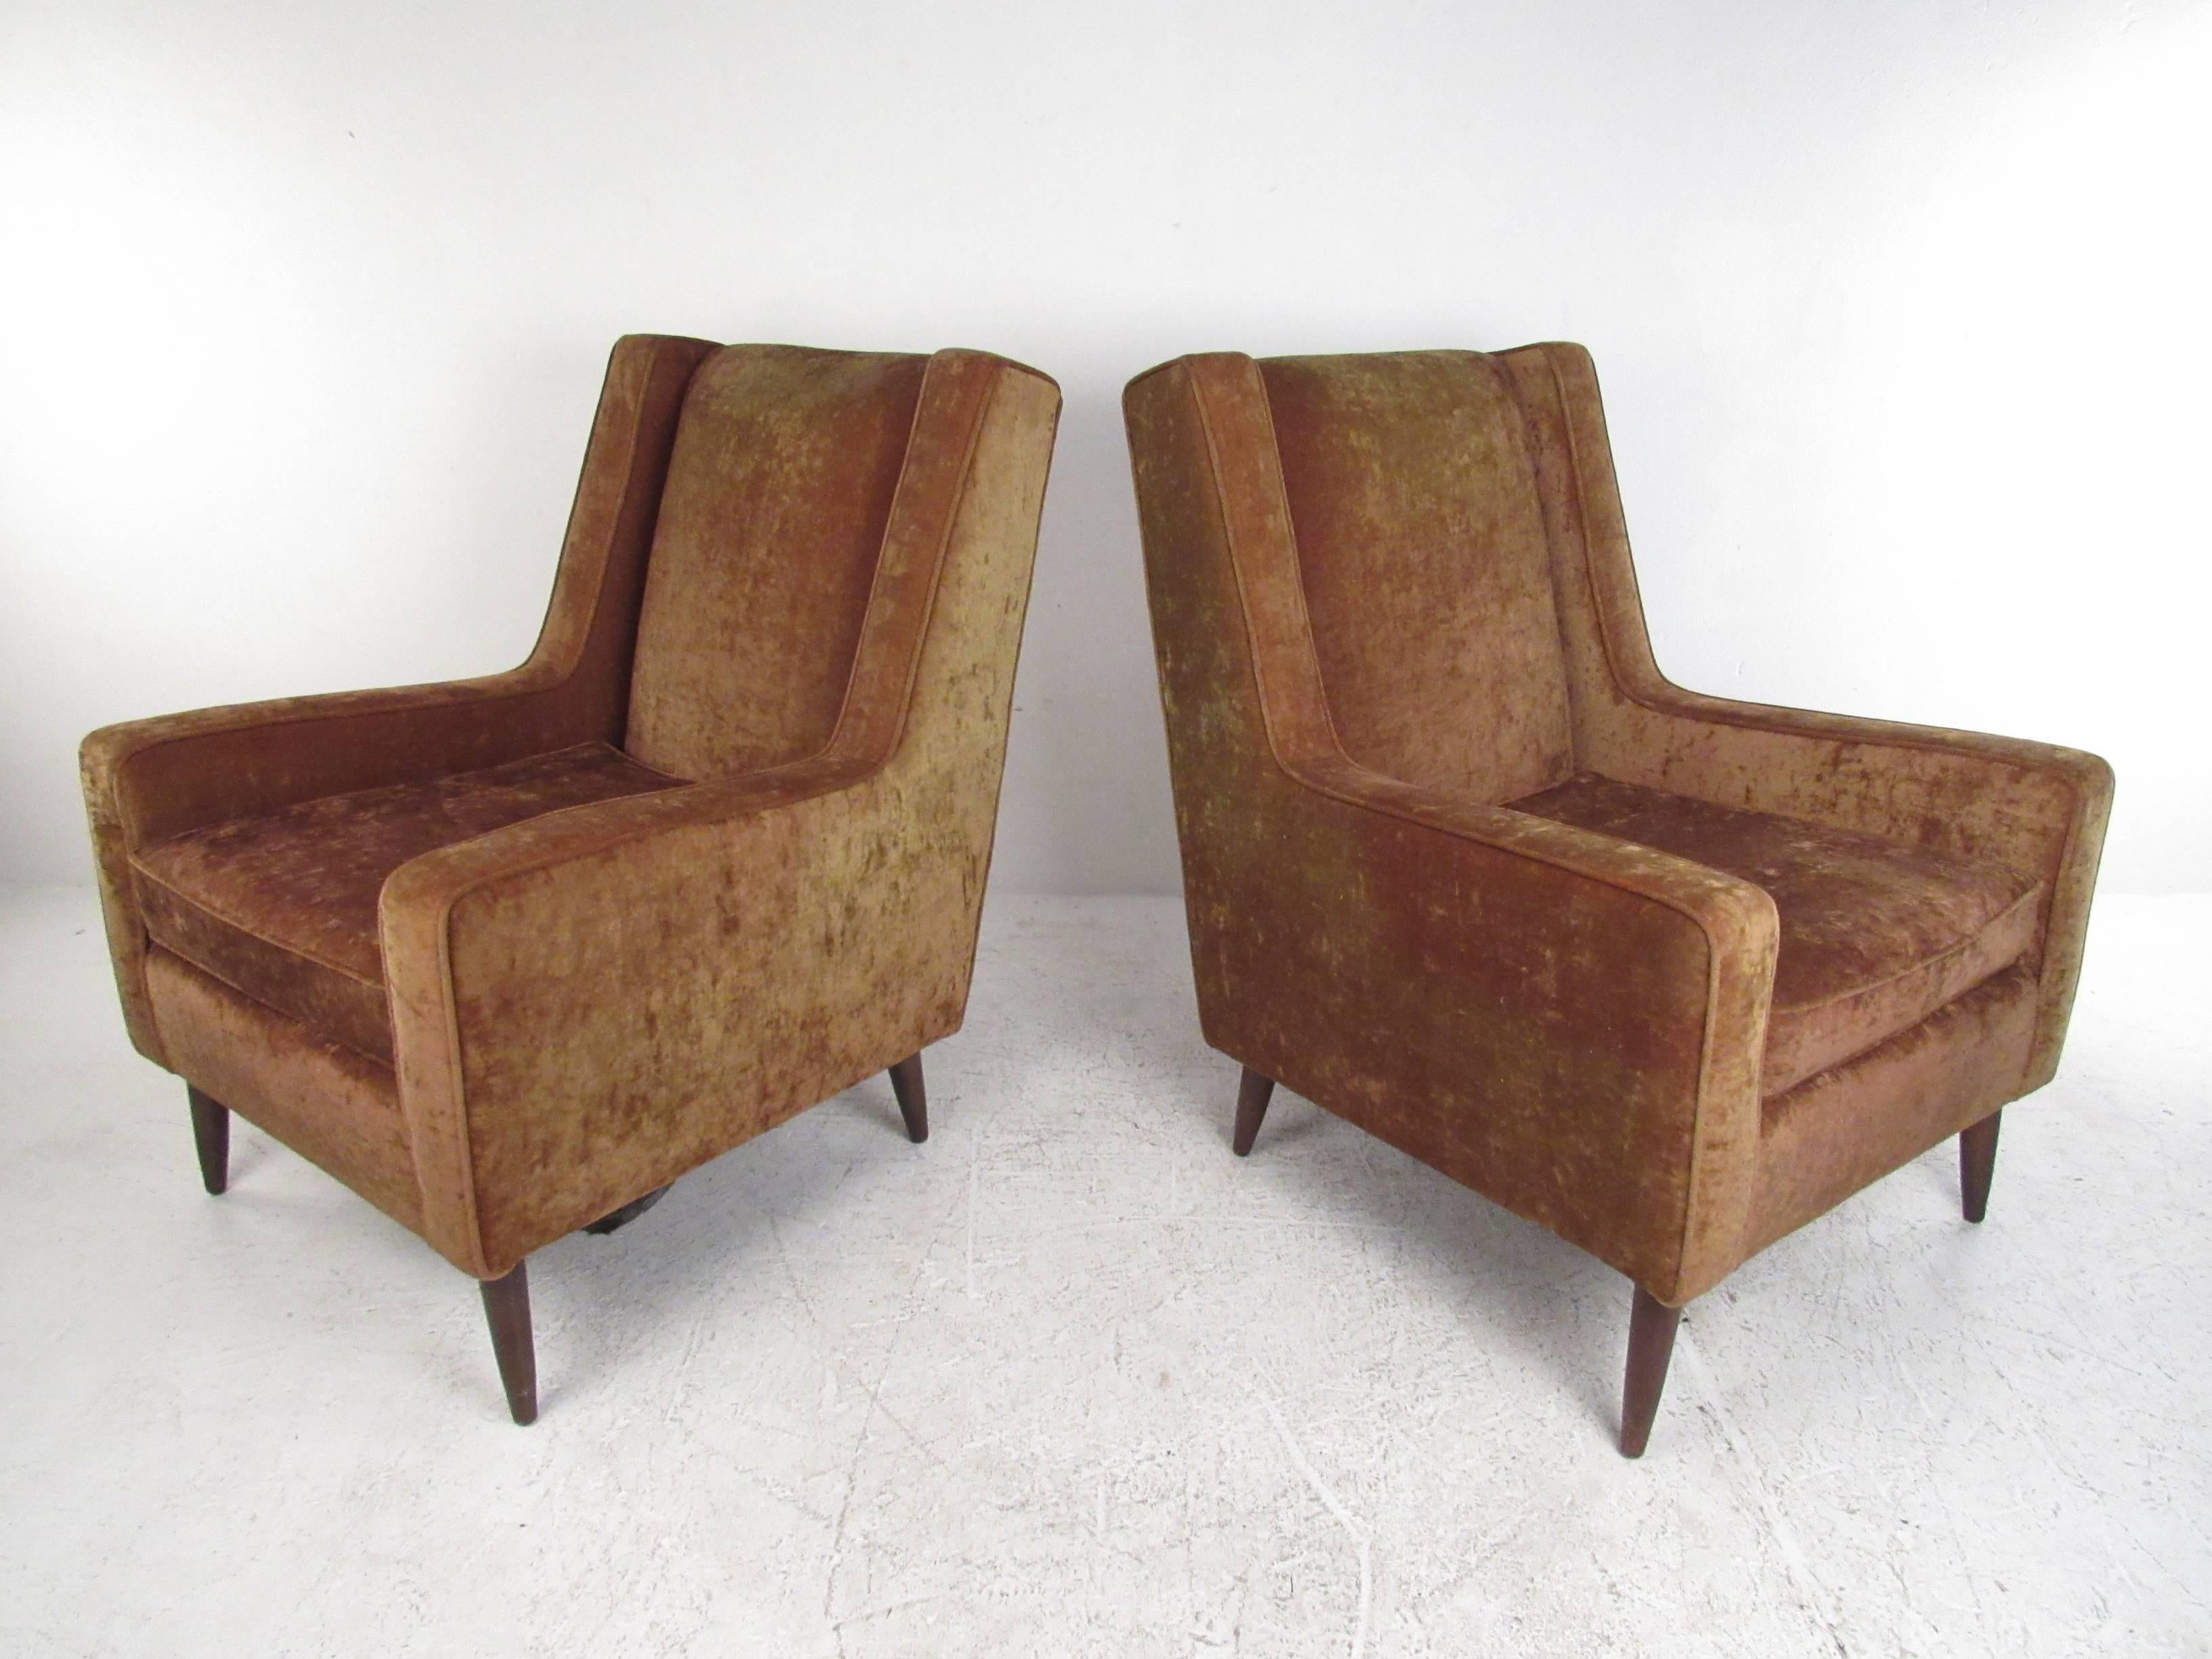 This matching pair of vintage lounge chairs features plush velvet fabric, tapered legs and clean/comfortable lines reminiscent of Mid-Century master Paul McCobb. Unique set of Mid-Century Modern armchairs make a stylish addition to any setting.